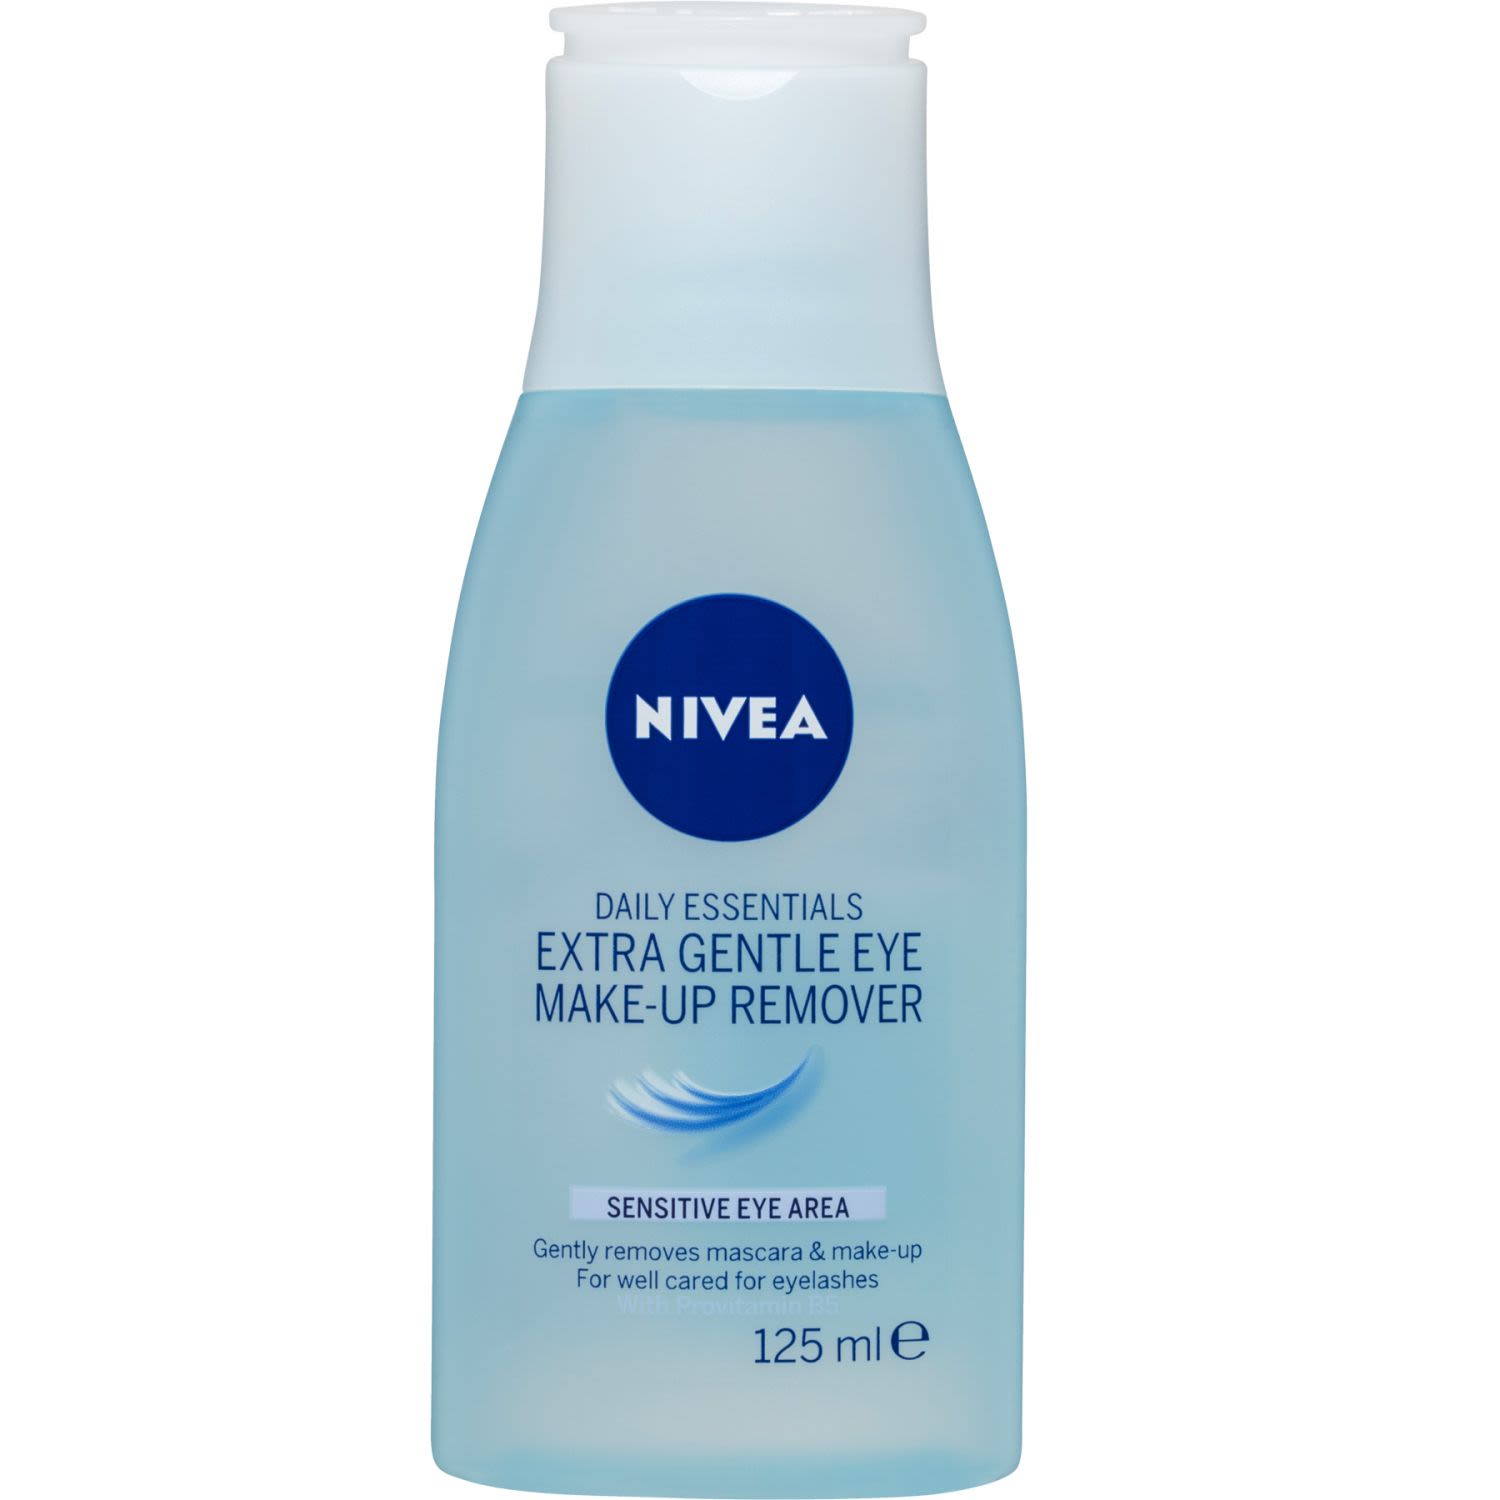 NIVEA Daily Essentials Extra Gentle Eye Make-Up Remover has a light formulation that is convenient and effective for gently removing makeup. The extra gentle ingredients remove all make-up, including eyeshadow, mascara and eyeliner whilst preventing irritation and inflation of the delicate eye area. The soothing and nourishing benefits of Pro-Vitamin B5 additionally ensure that the skin protective barrier is not stripped in the cleansing process. The formula moisturises the skin without leaving behind greasy residue. NIVEAs Extra Gentle Eye Make-Up Remover is dermatologically approved and suggested for sensitive eye areas.<br /> <br /> <br /><br />Country of Origin: Made in Germany